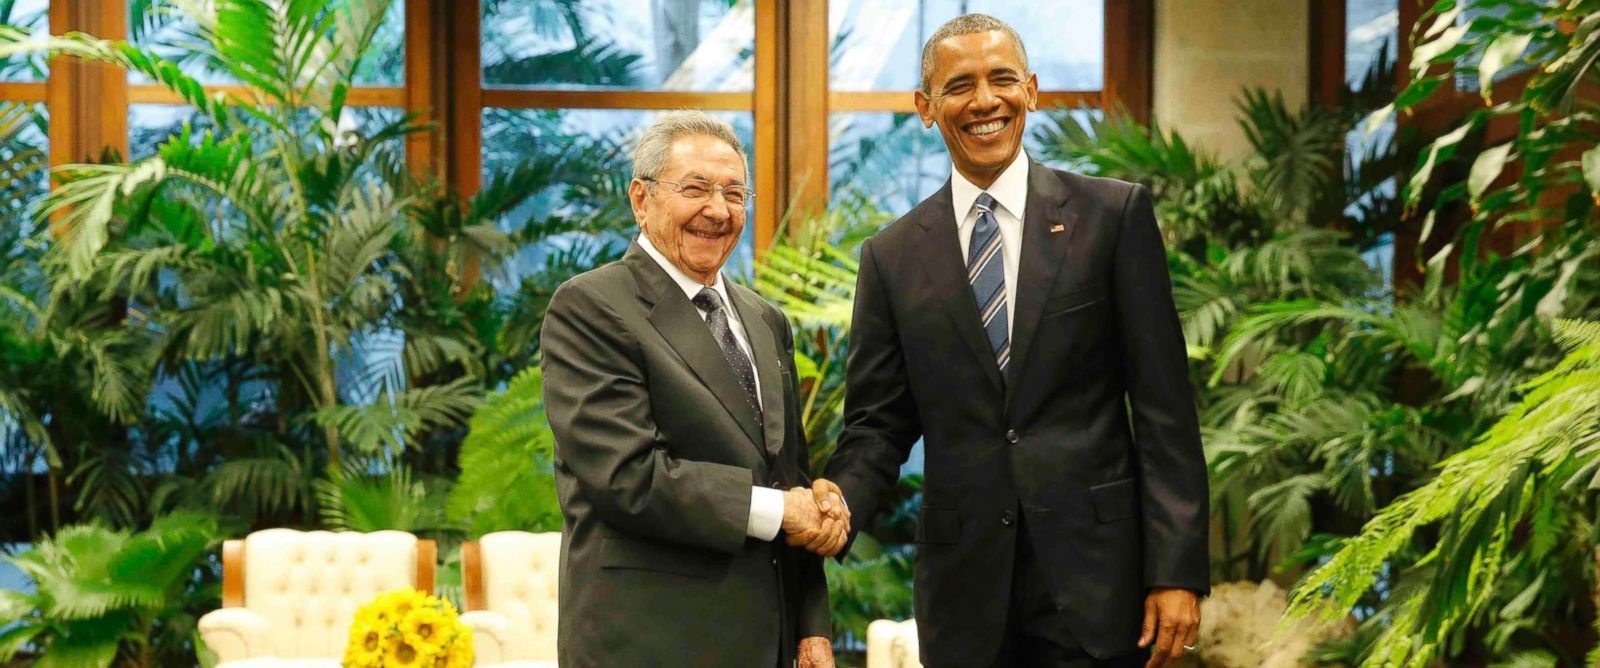 Barrack Obama Gets A Grand Greeting From Cuban President Fidel Castro